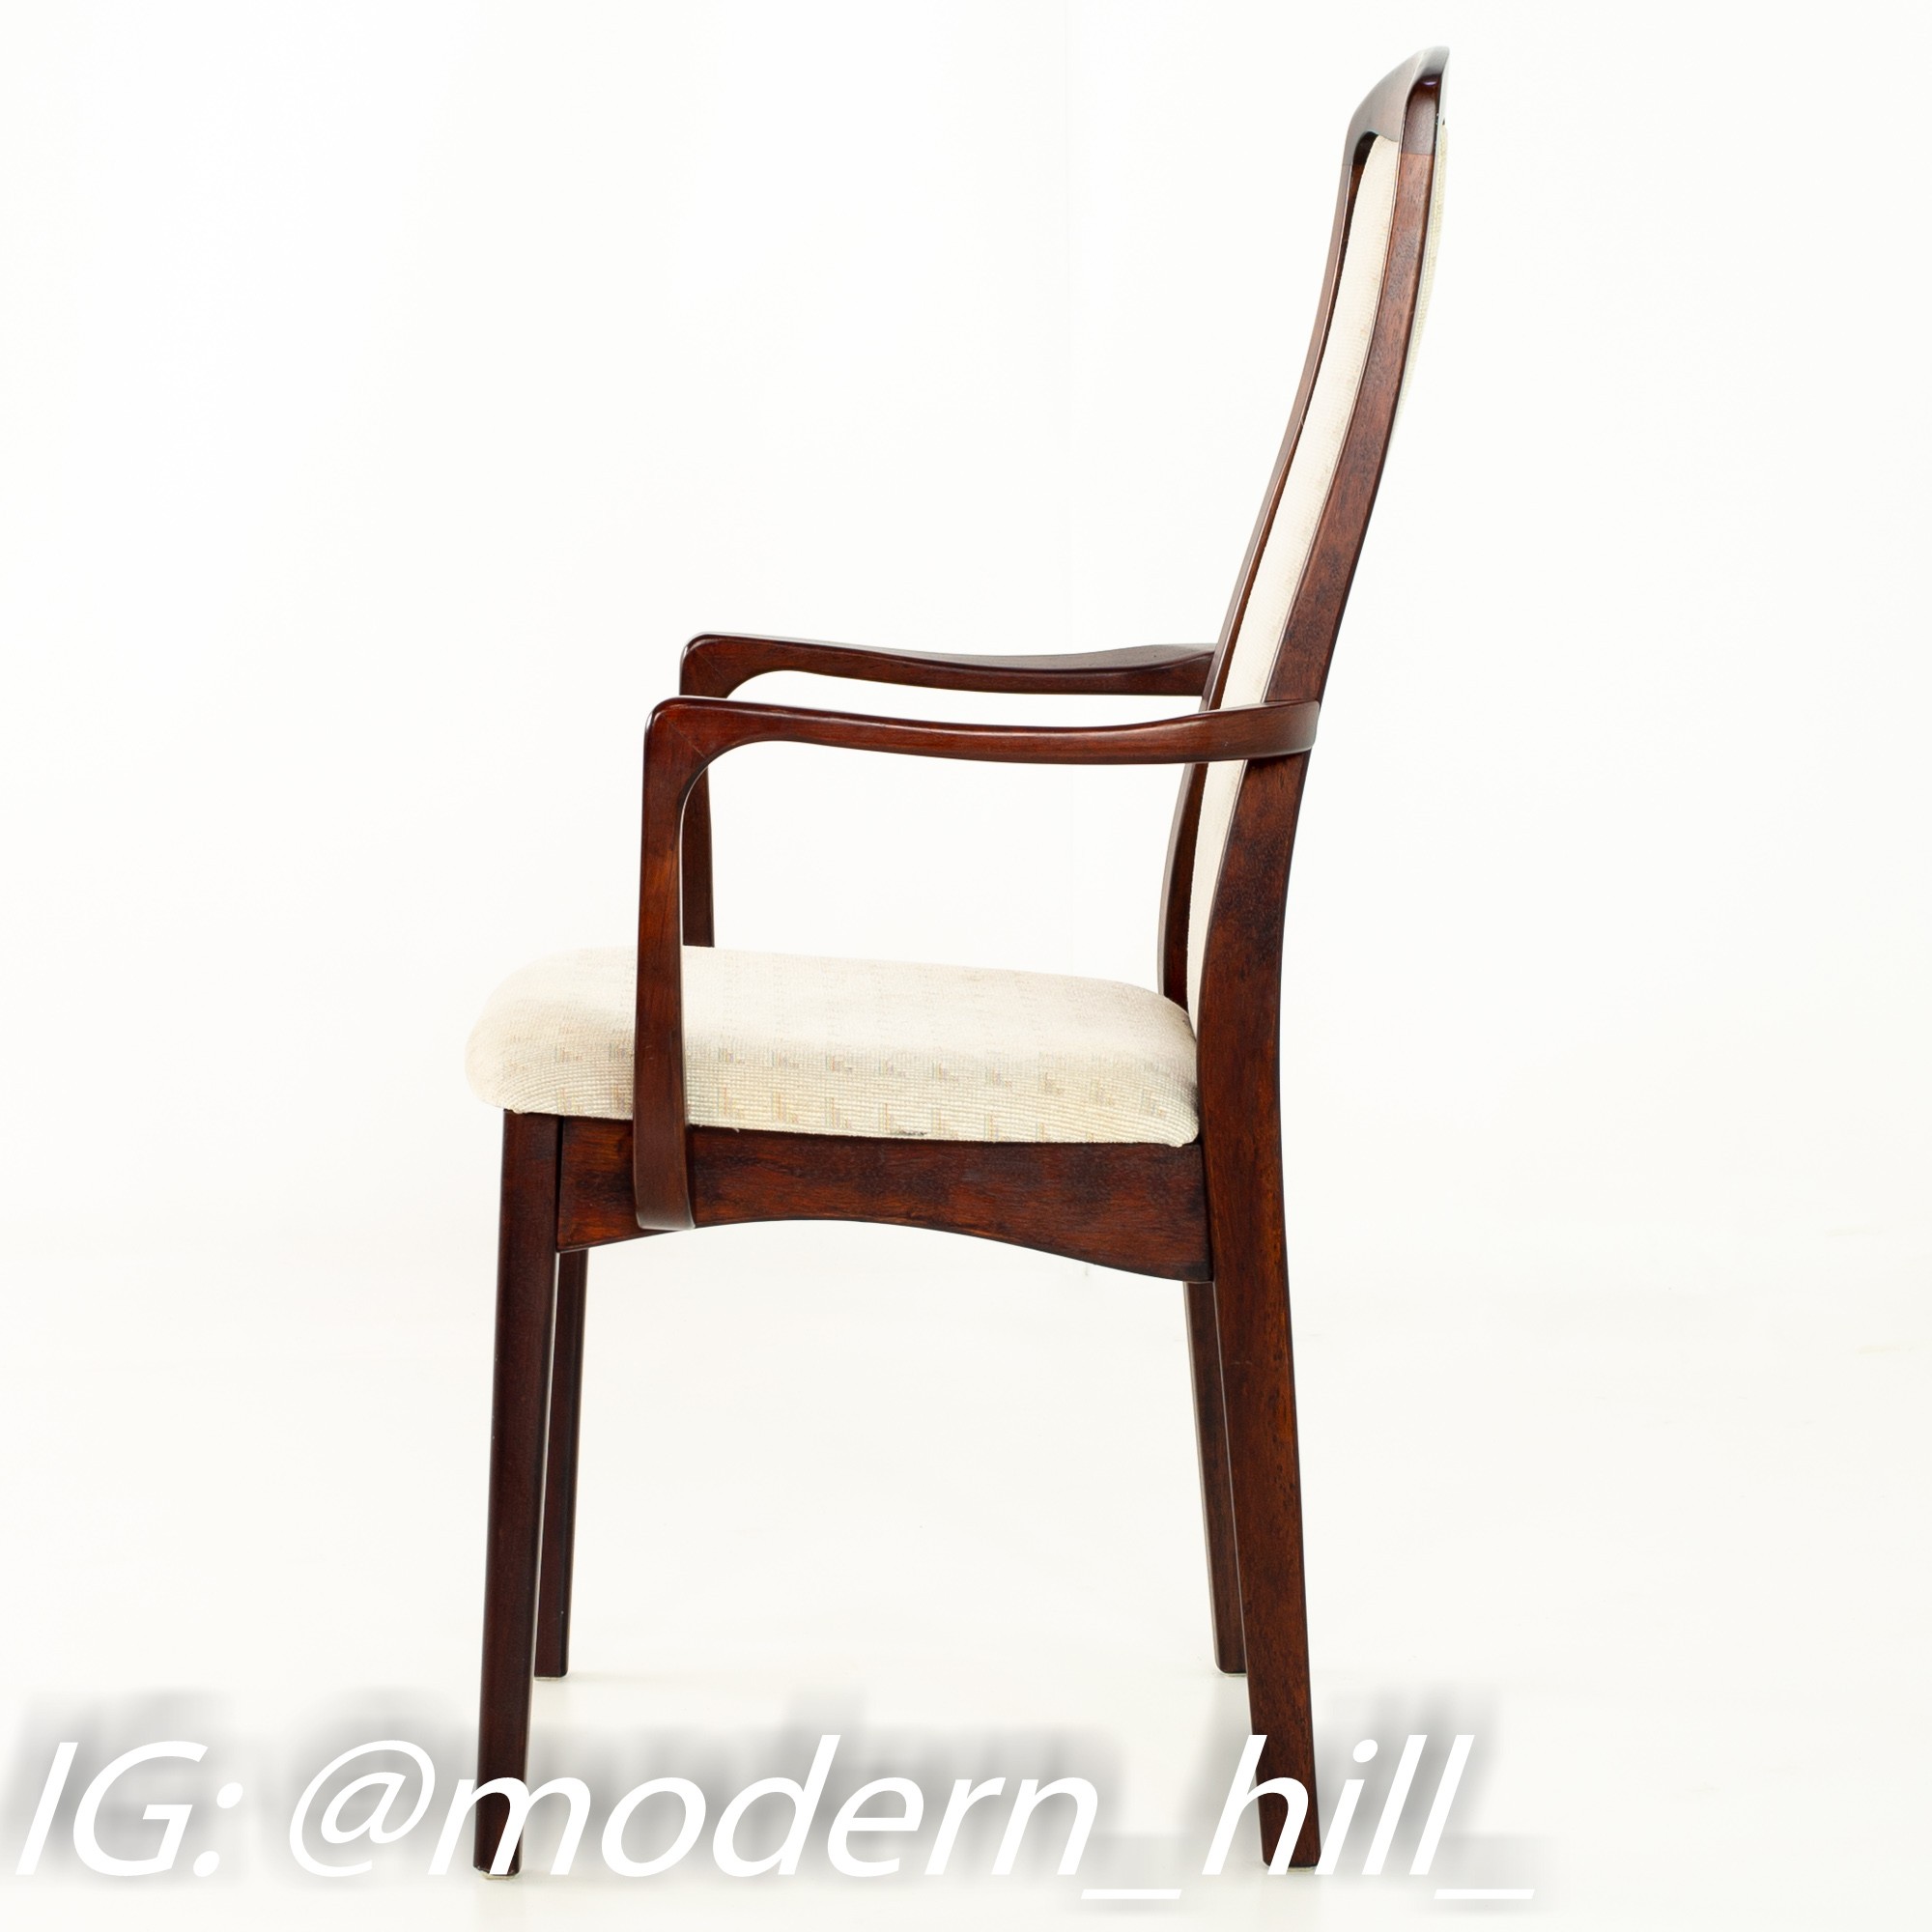 Breox Mobler Snickerinytt Rosewood Mid Century Dining Chairs - Set of 4